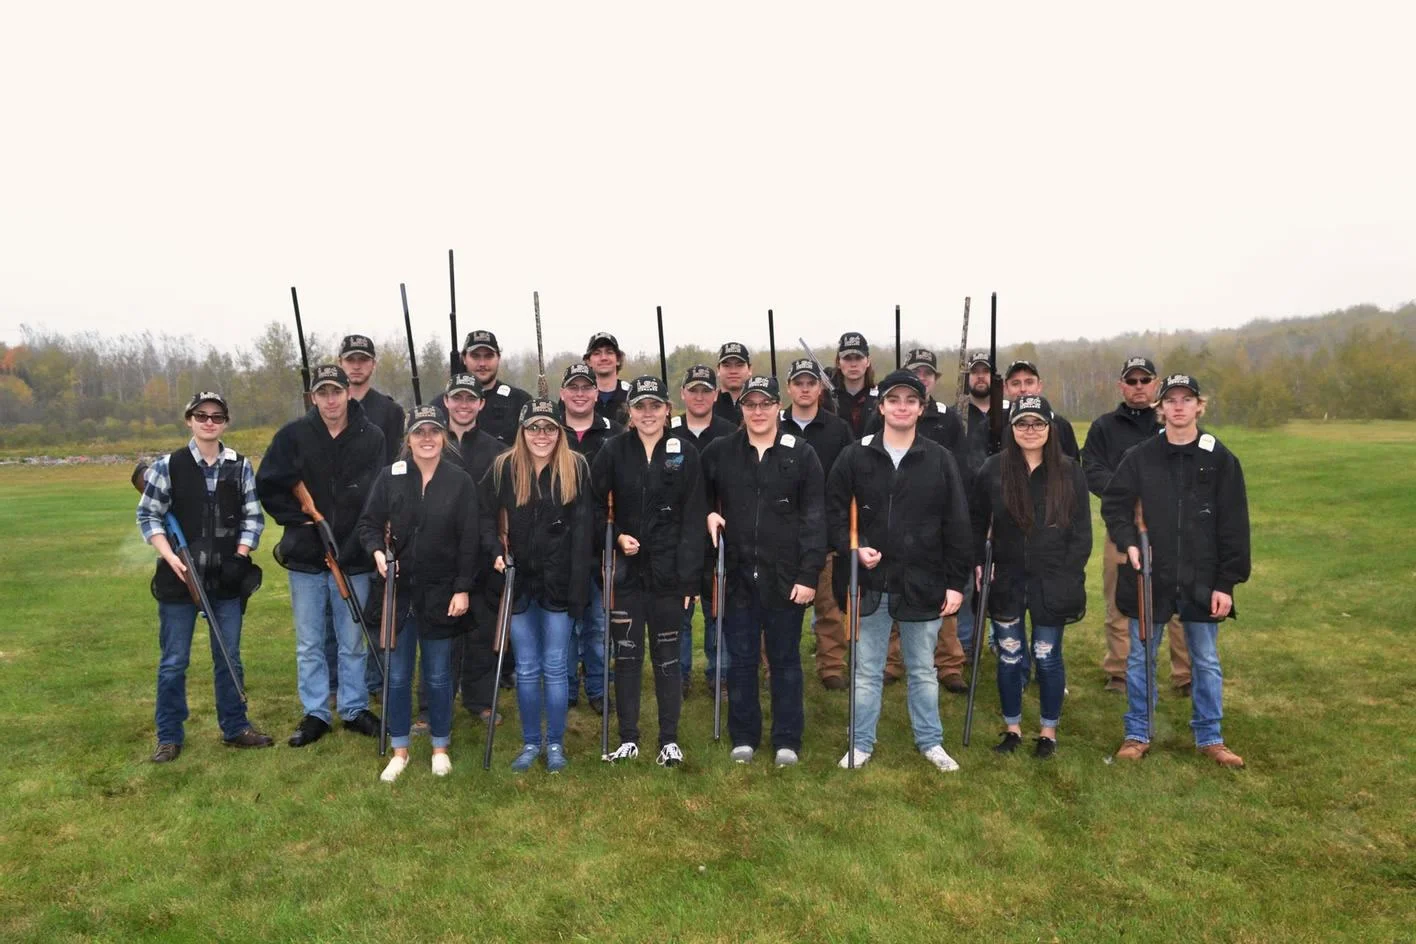 Lake Superior College’s Co-Ed Clay Target Team Wins Conference For Fourth Year In a Row